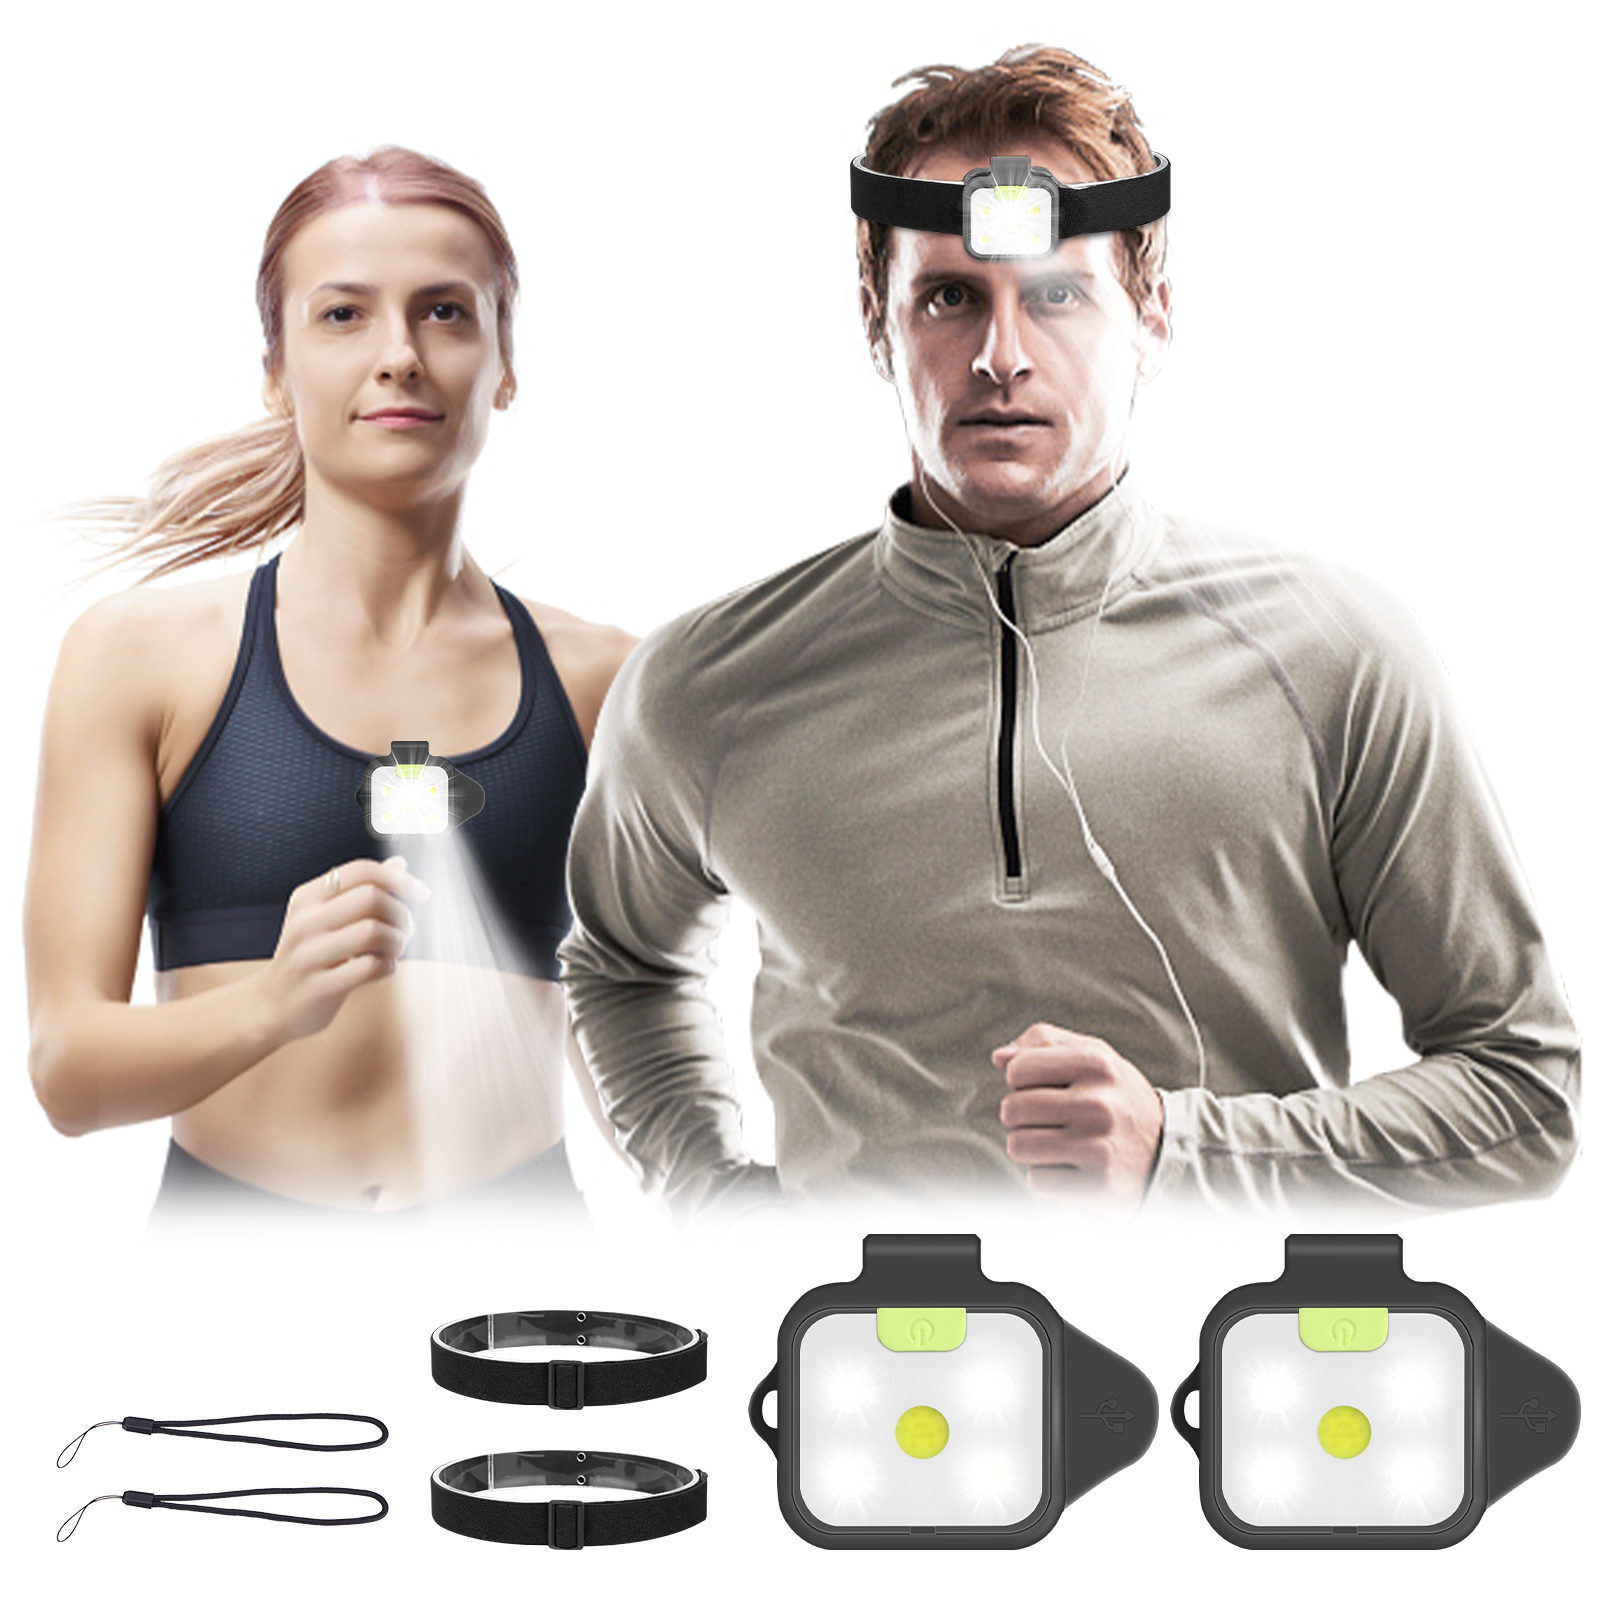 2Pcs-USB-Rechargeable-Running-Light-Fluorescent-Running-Light-Chest-Light-Comes-with-Two-Headbands-a-1809600-1